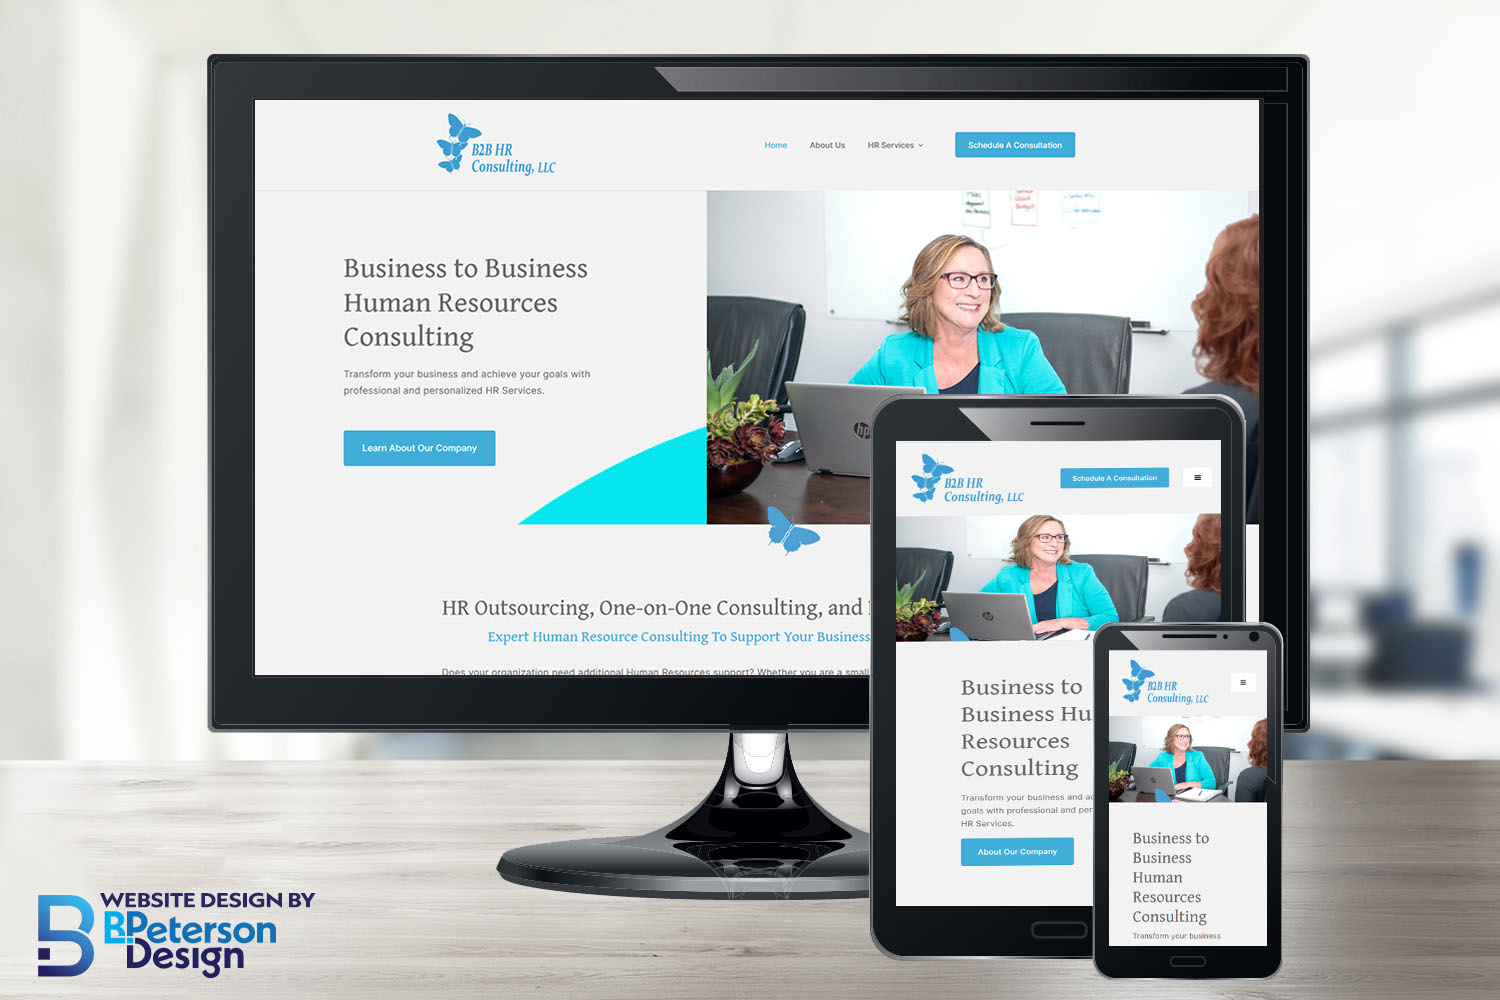 B2B HR Consulting's website displayed on responsive platforms